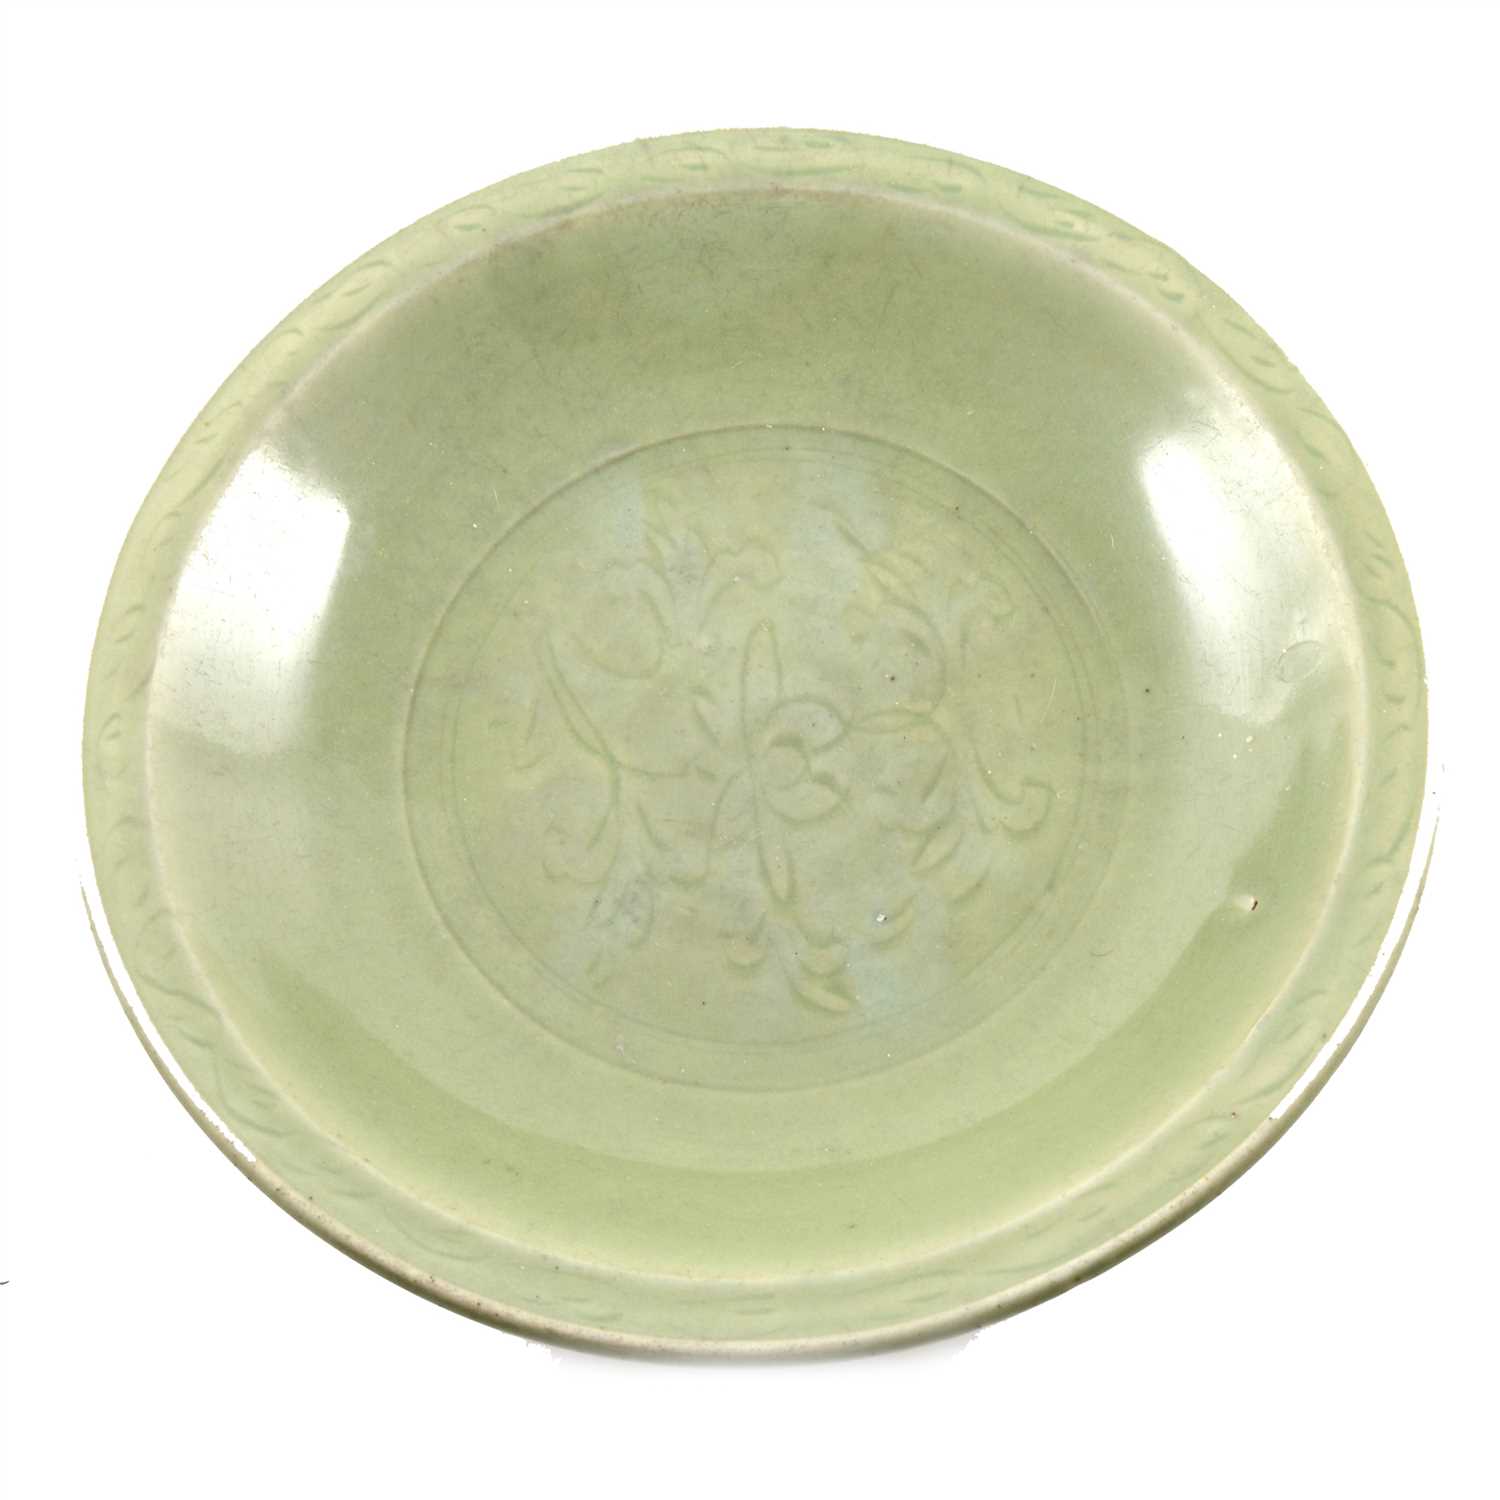 Lot 69 - Chinese celadon glazed basin, shallow dished form, incised with lotus flower and scrolls, 20th Century, daimeter 45cm.